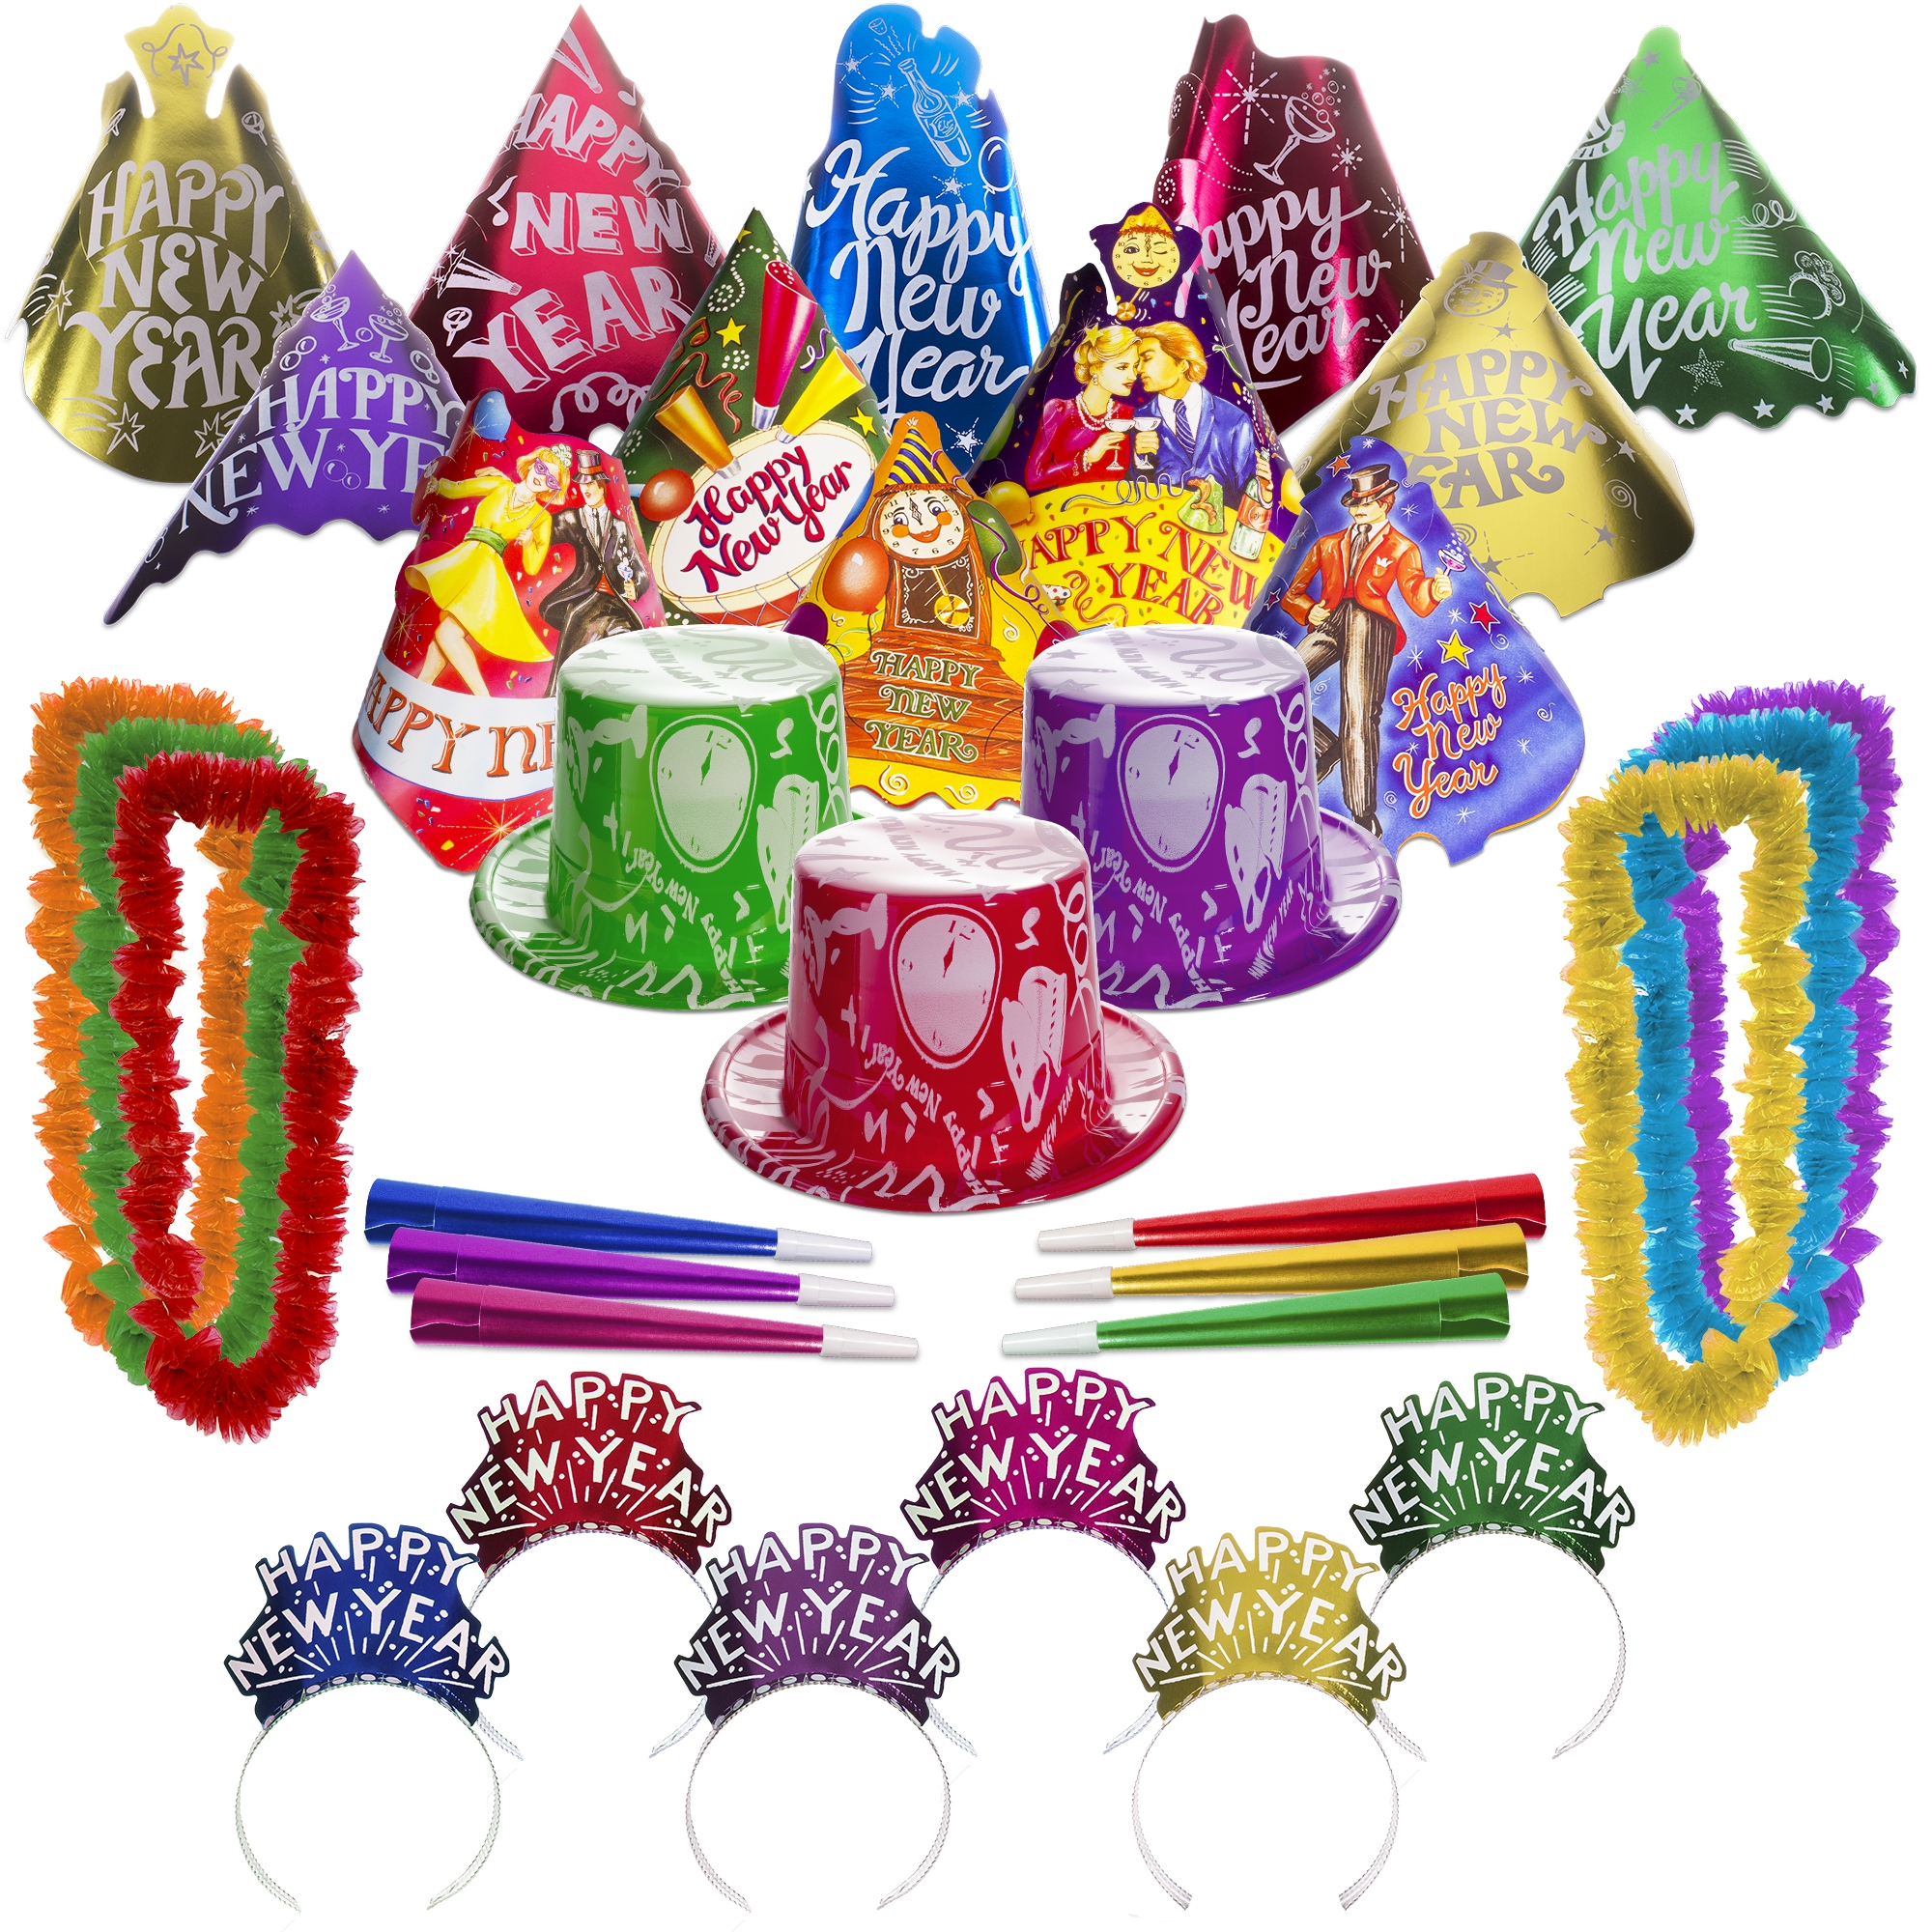 Grand Slam New Year Party Kit For 100 by Windy City Novelties